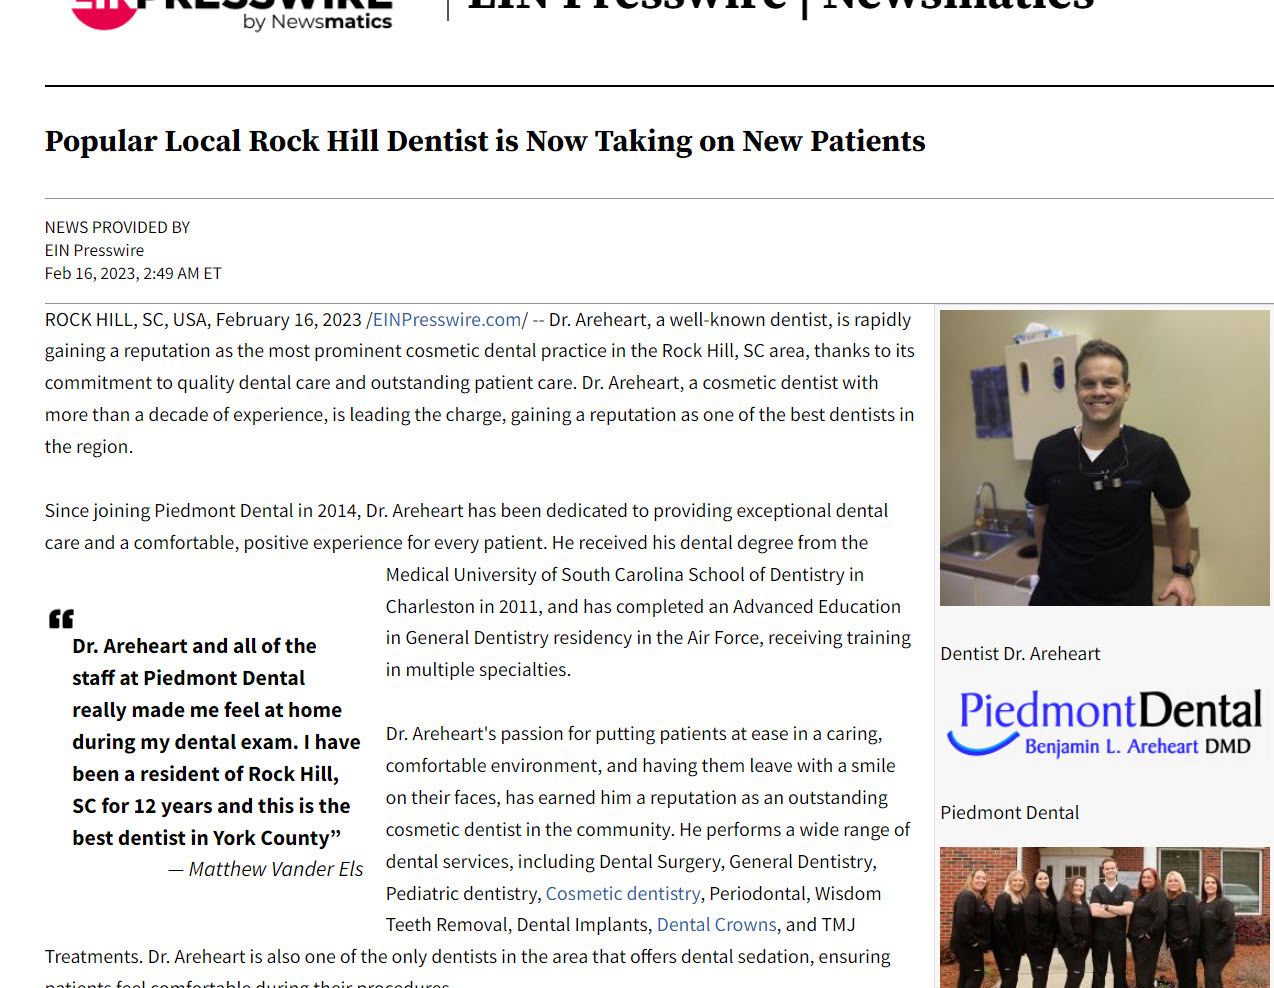 local rock hill news article about Piedmont Dental in Rock Hill